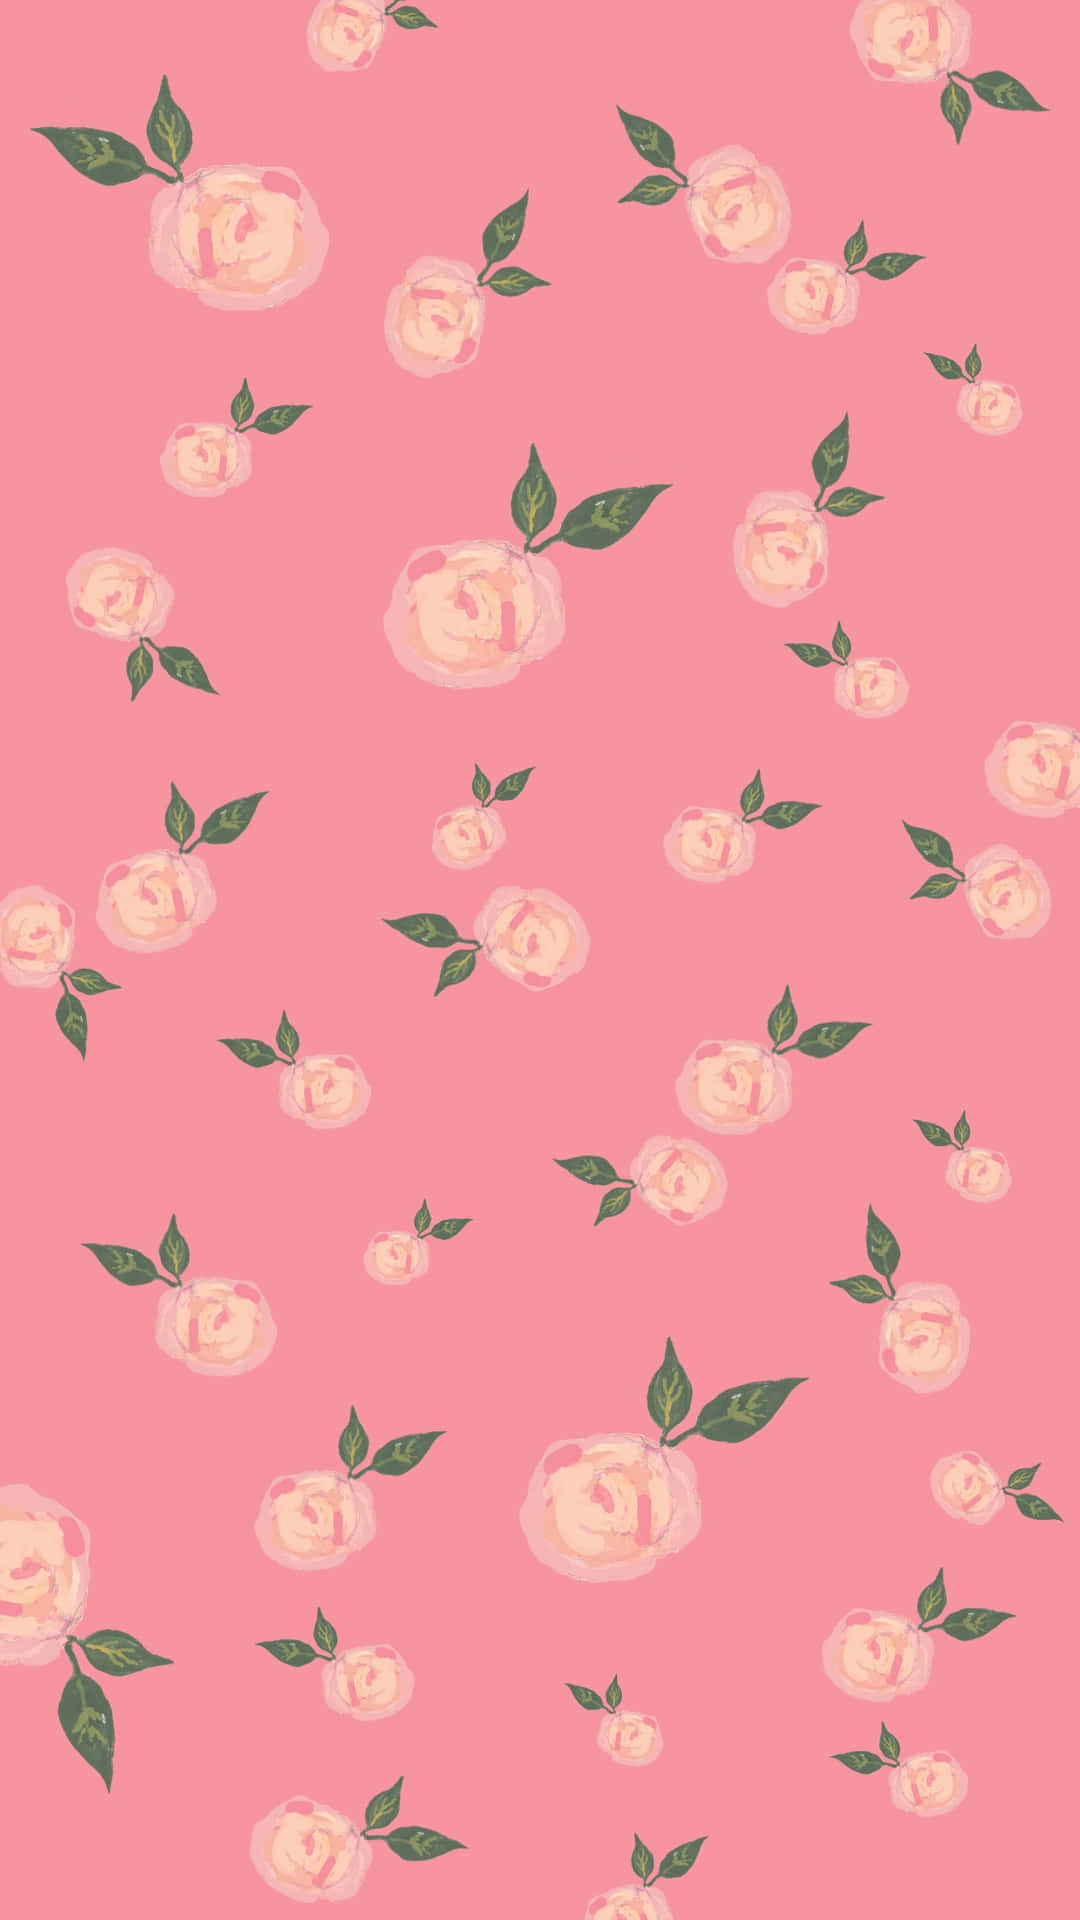 Download A Pink Rose Pattern With Leaves On It Wallpaper | Wallpapers.com